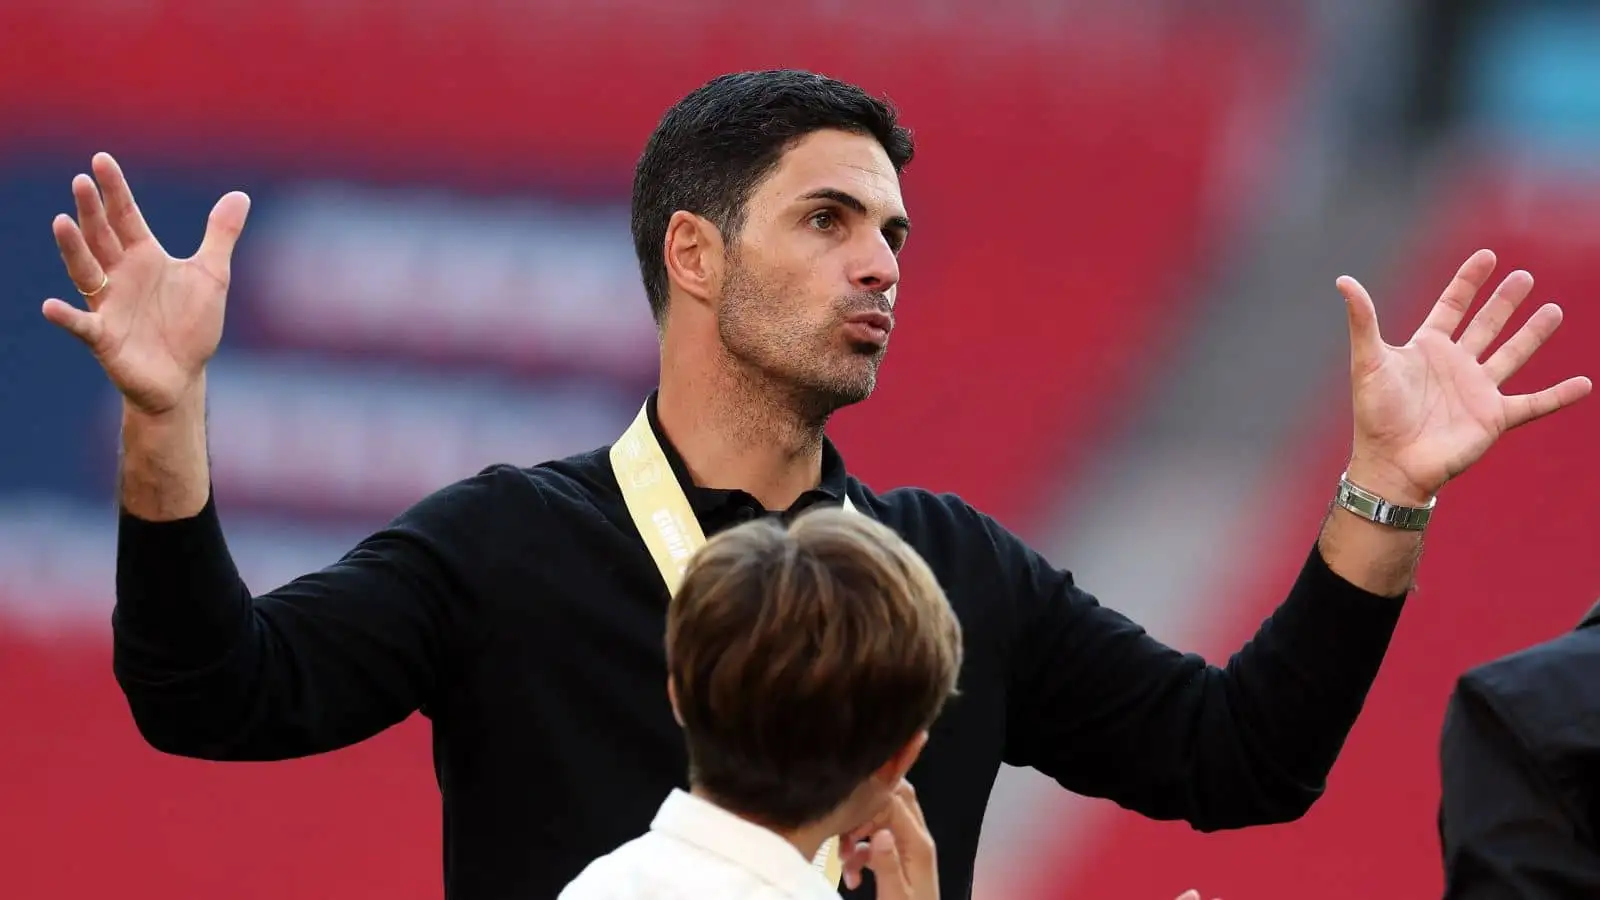 Mikel Arteta, the manager of Arsenal celebrates with his sons after the game. FA Community Shield match, Arsenal v Manchester City at Wembley Stadium in London